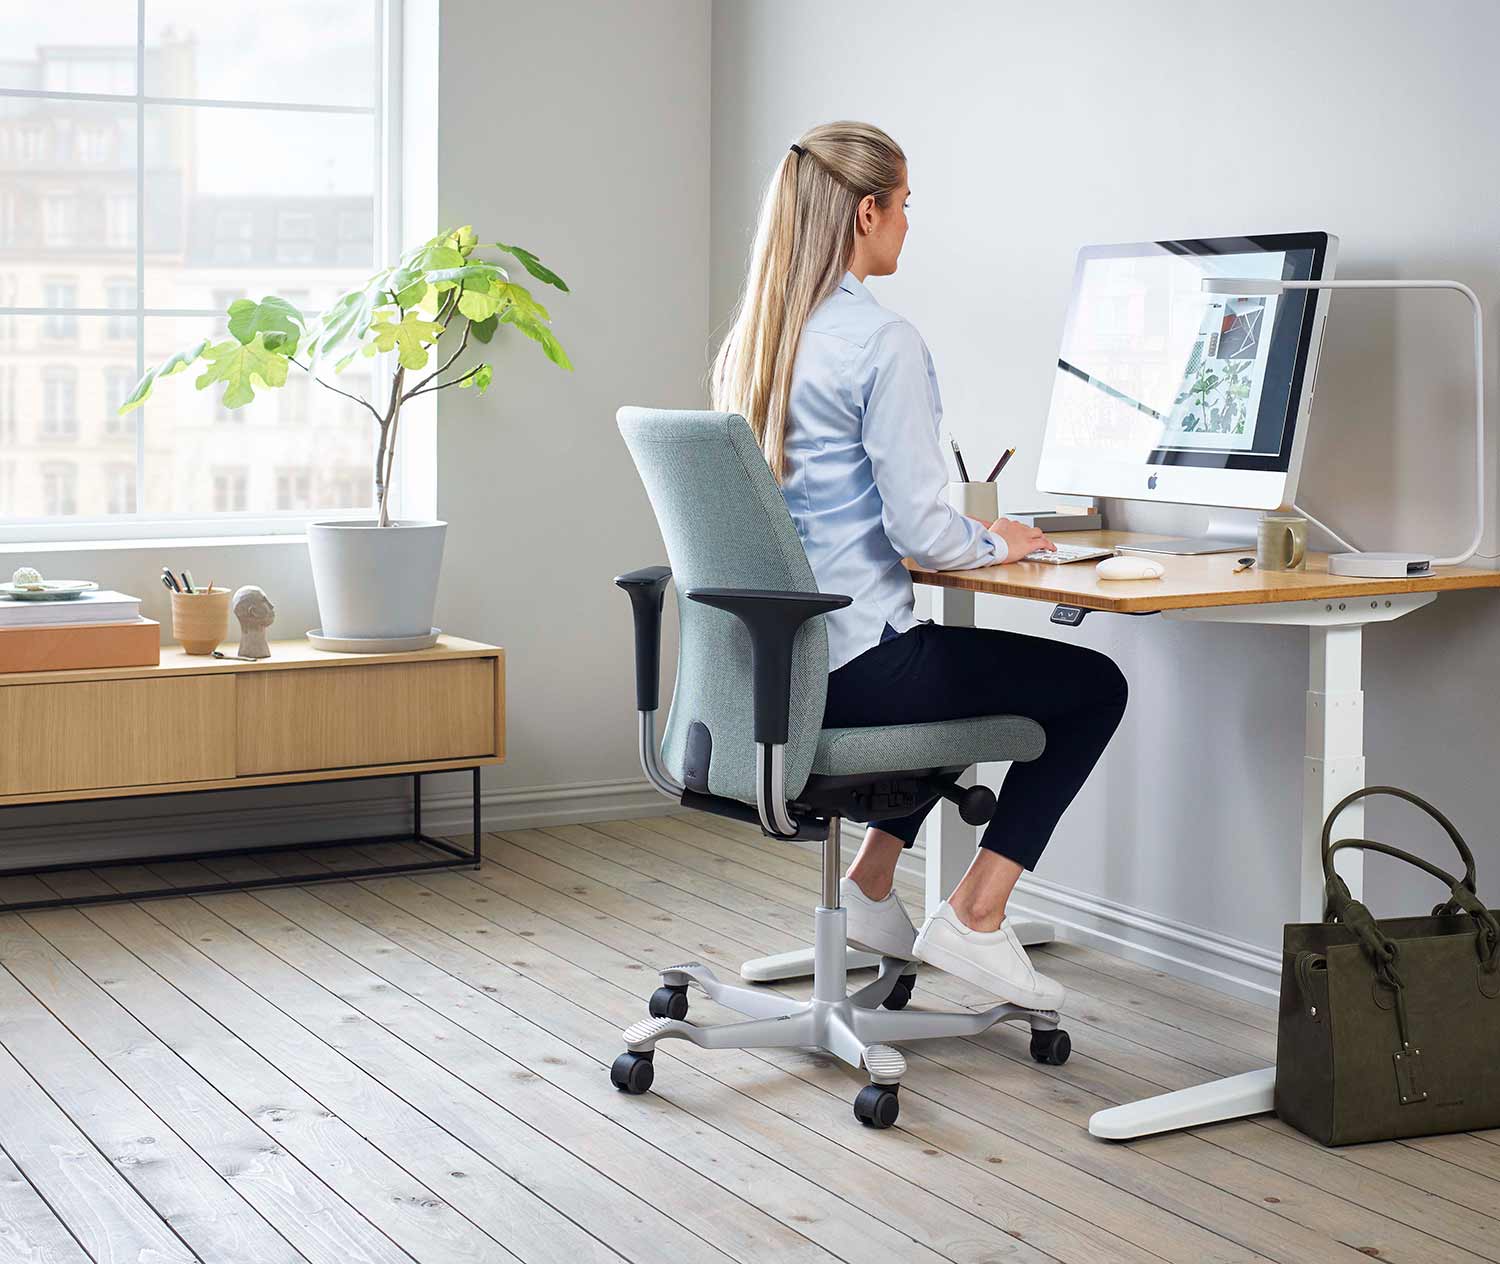 HÅG Creed home office chair for working form home ergonomics and wellbeing breen desk chair for women and men